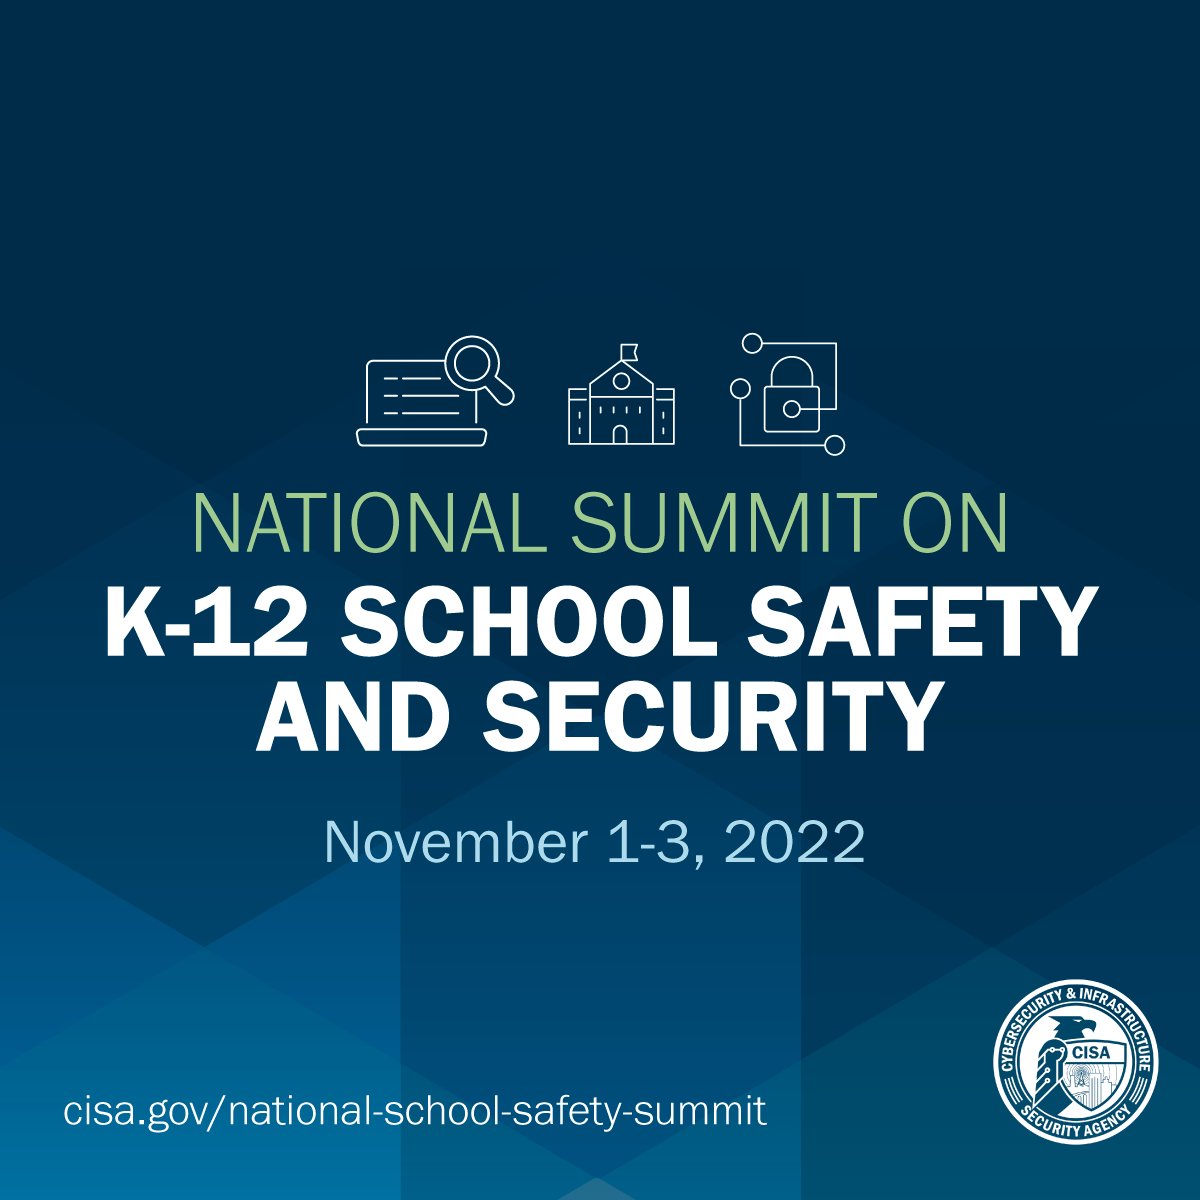 The National Summit of K-12 School Safety and Security this week has featured the latest research, resources, programs, and guidance available on a range of school safety topics and threats.